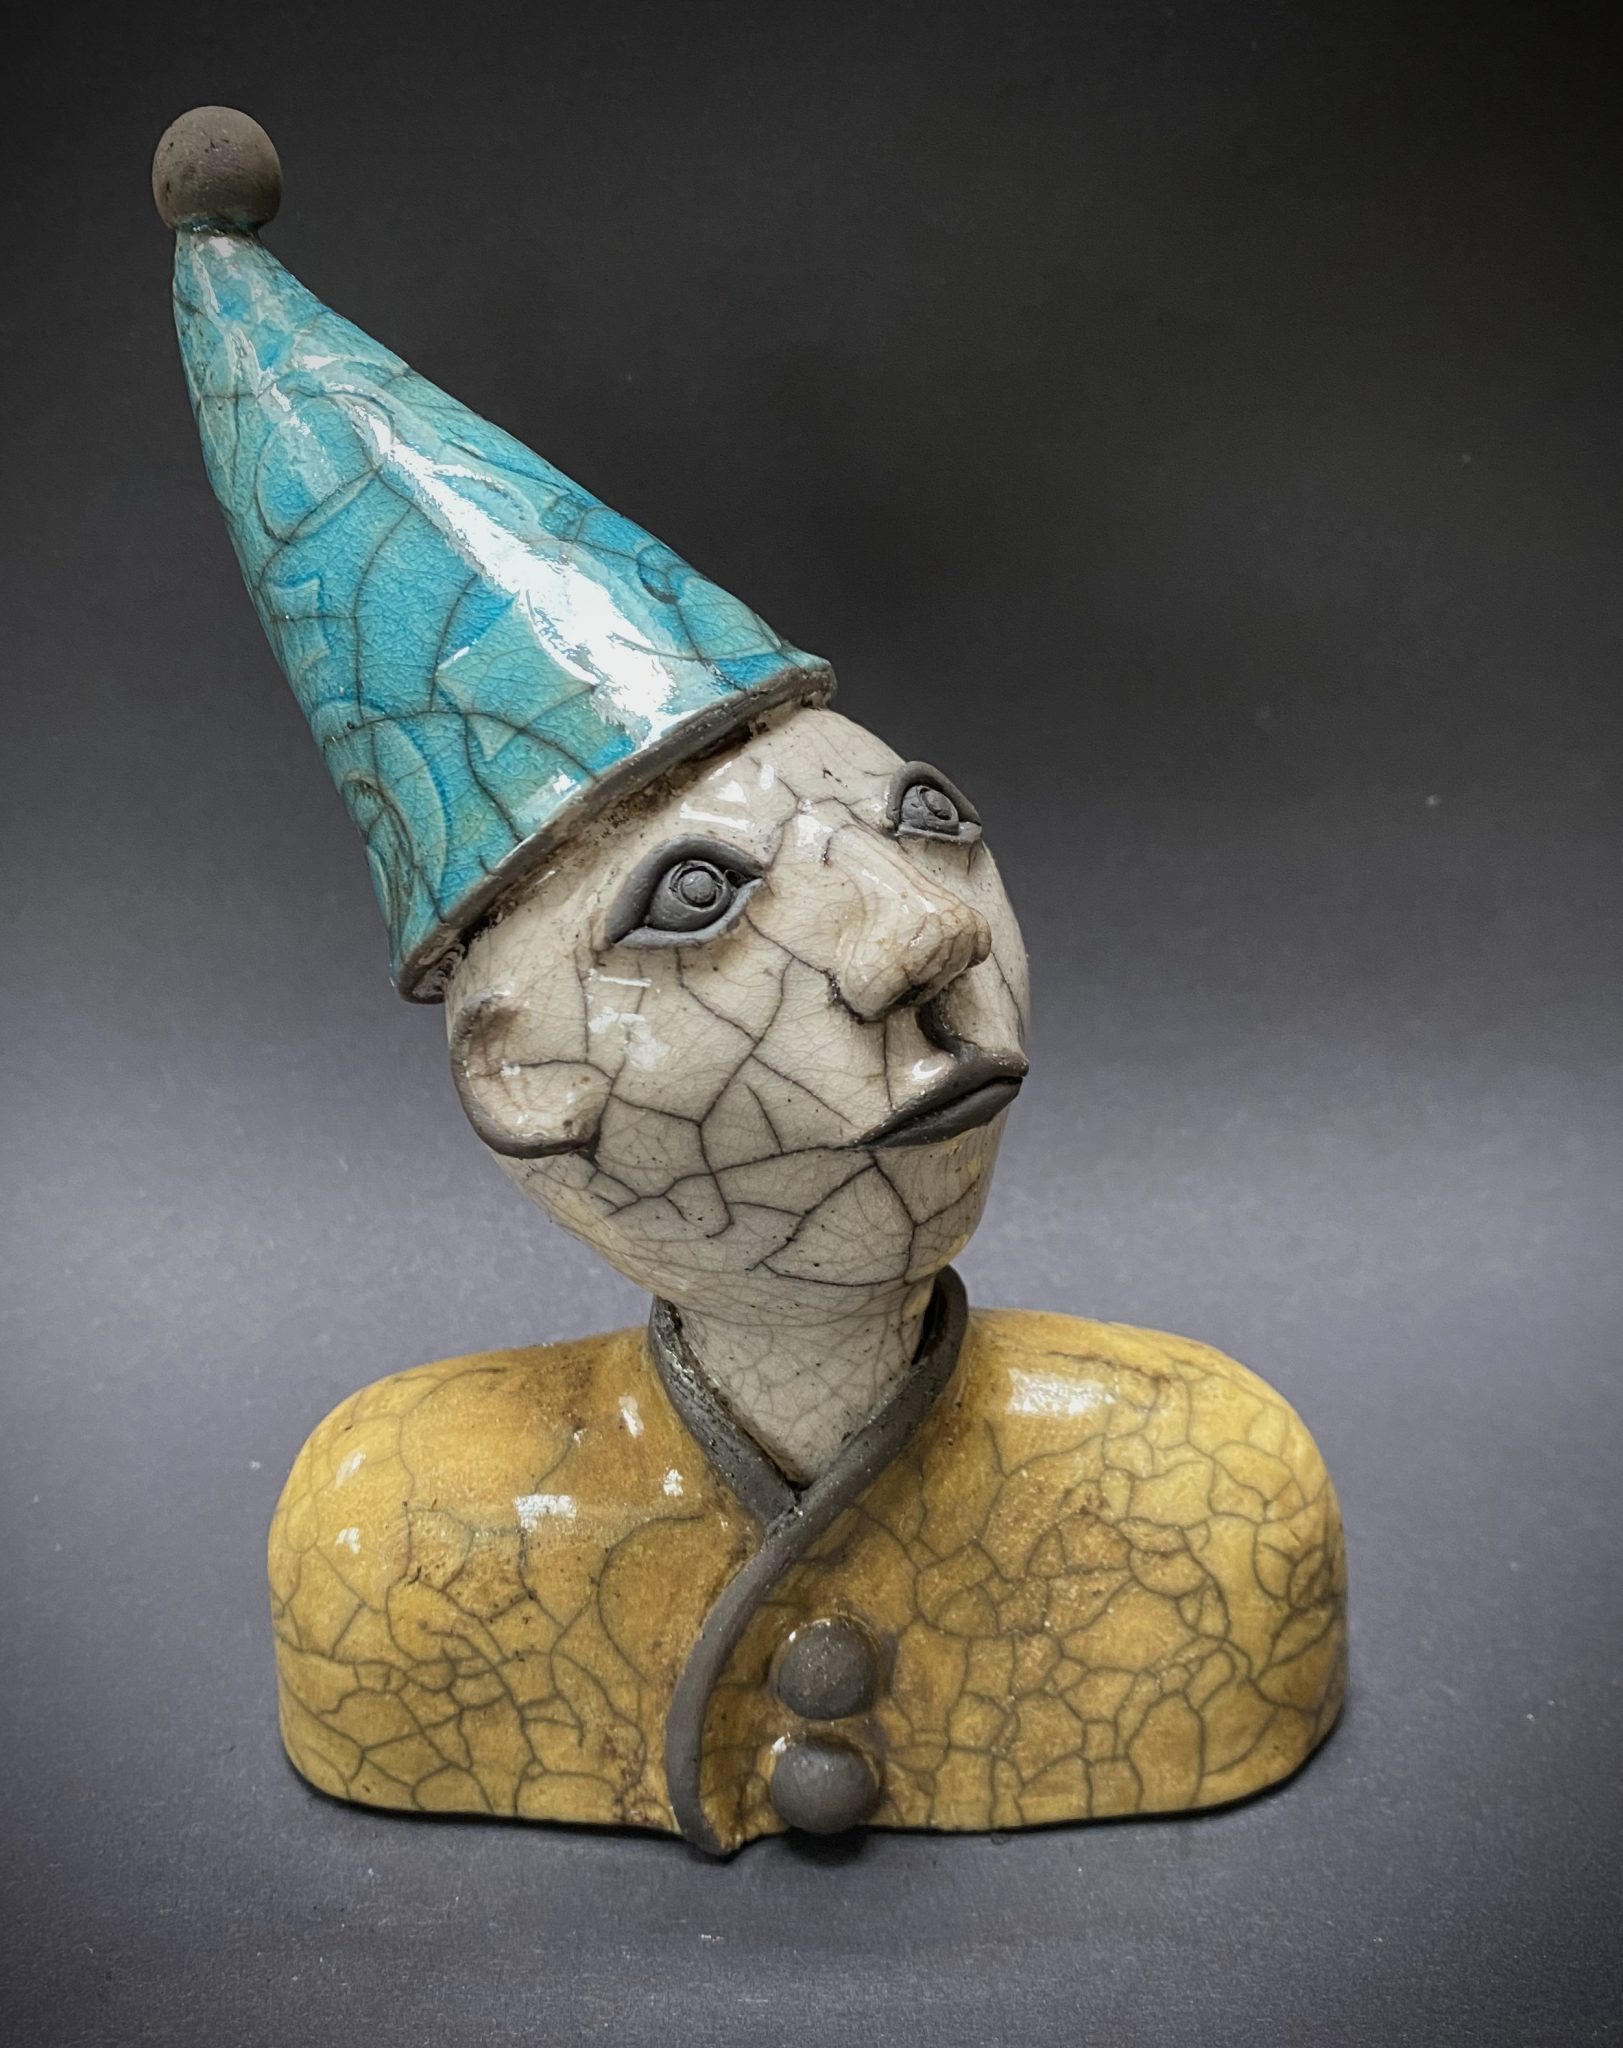 Head with blue hat and yellow jacket